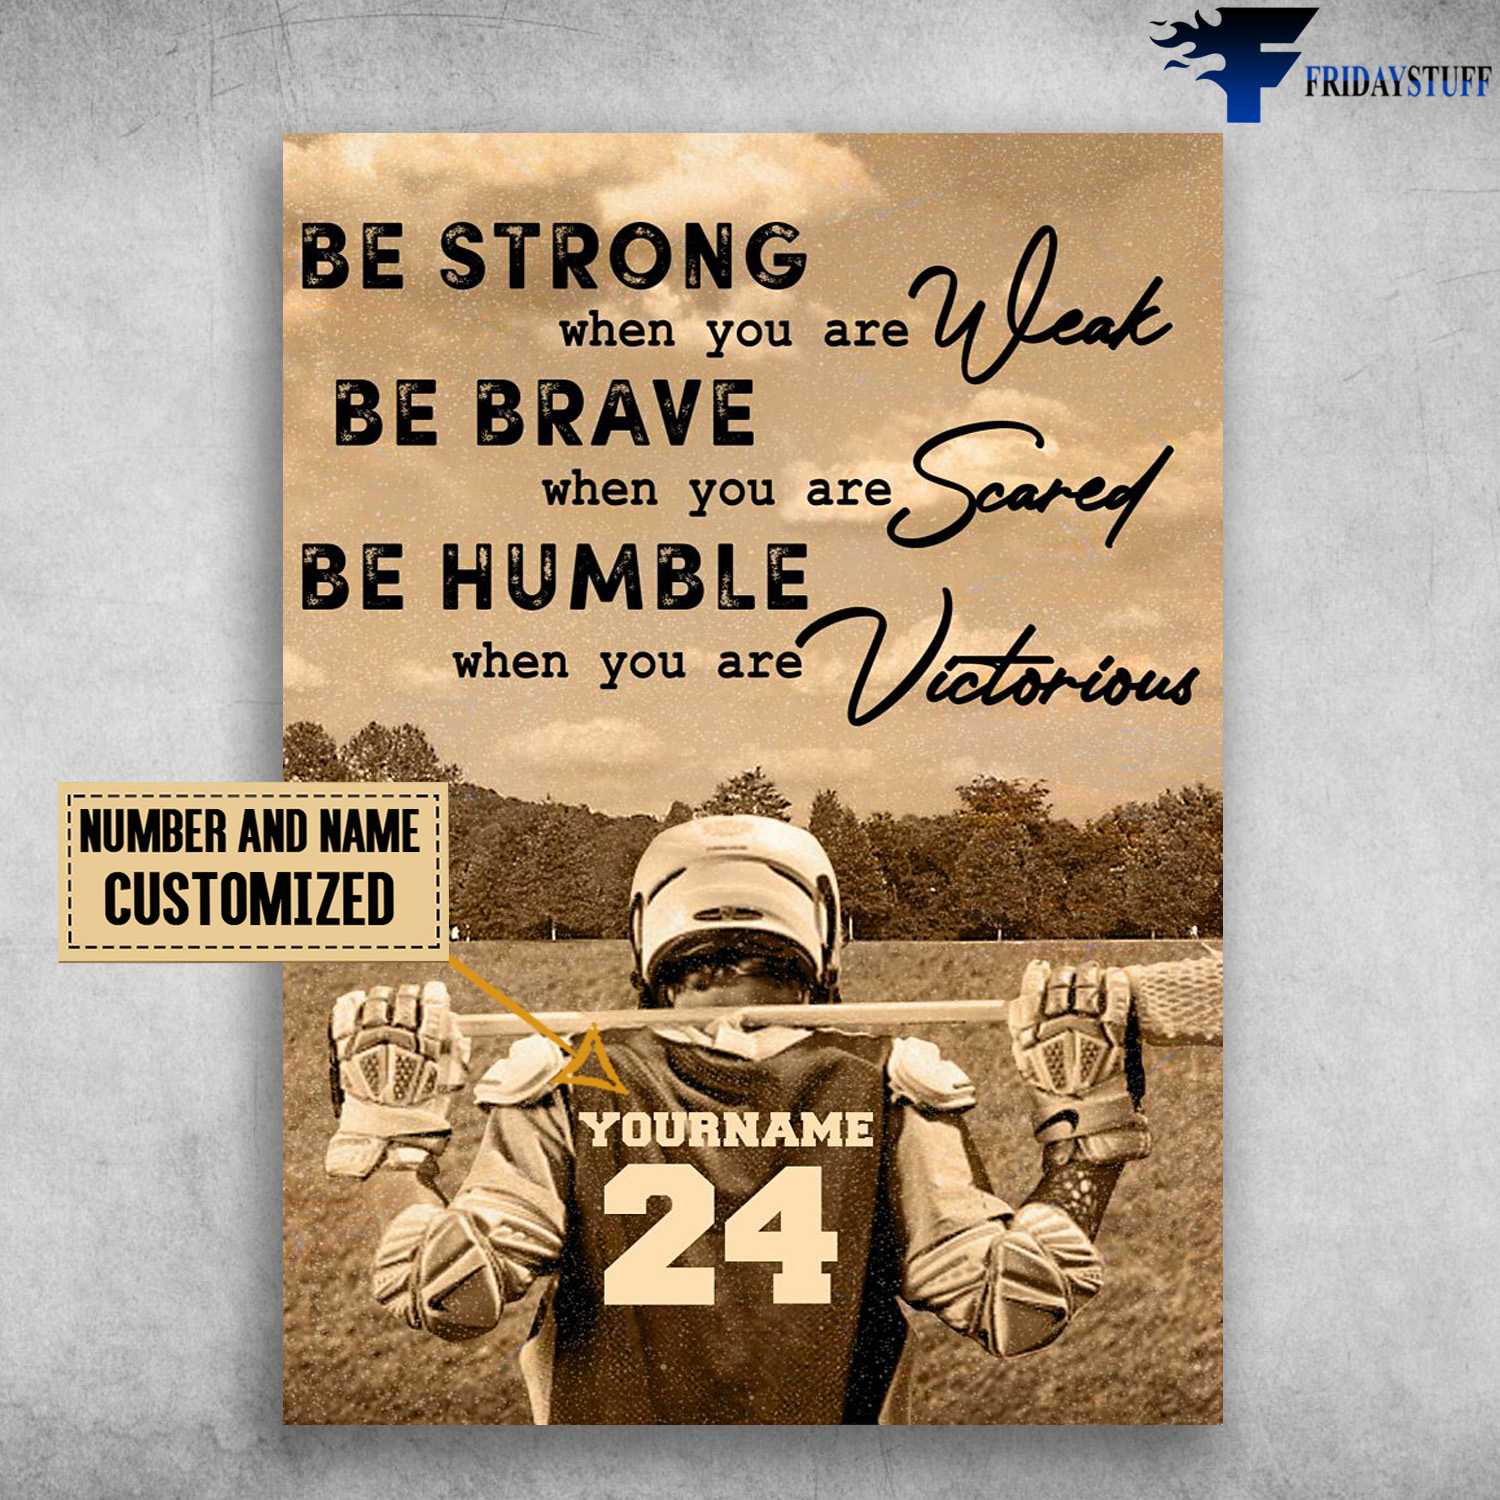 Lacrosse Poster, Lacrosse Player, Be Strong When You Are Weak, Be Brave When You Are Scared, Be Humble When You Are Victorious